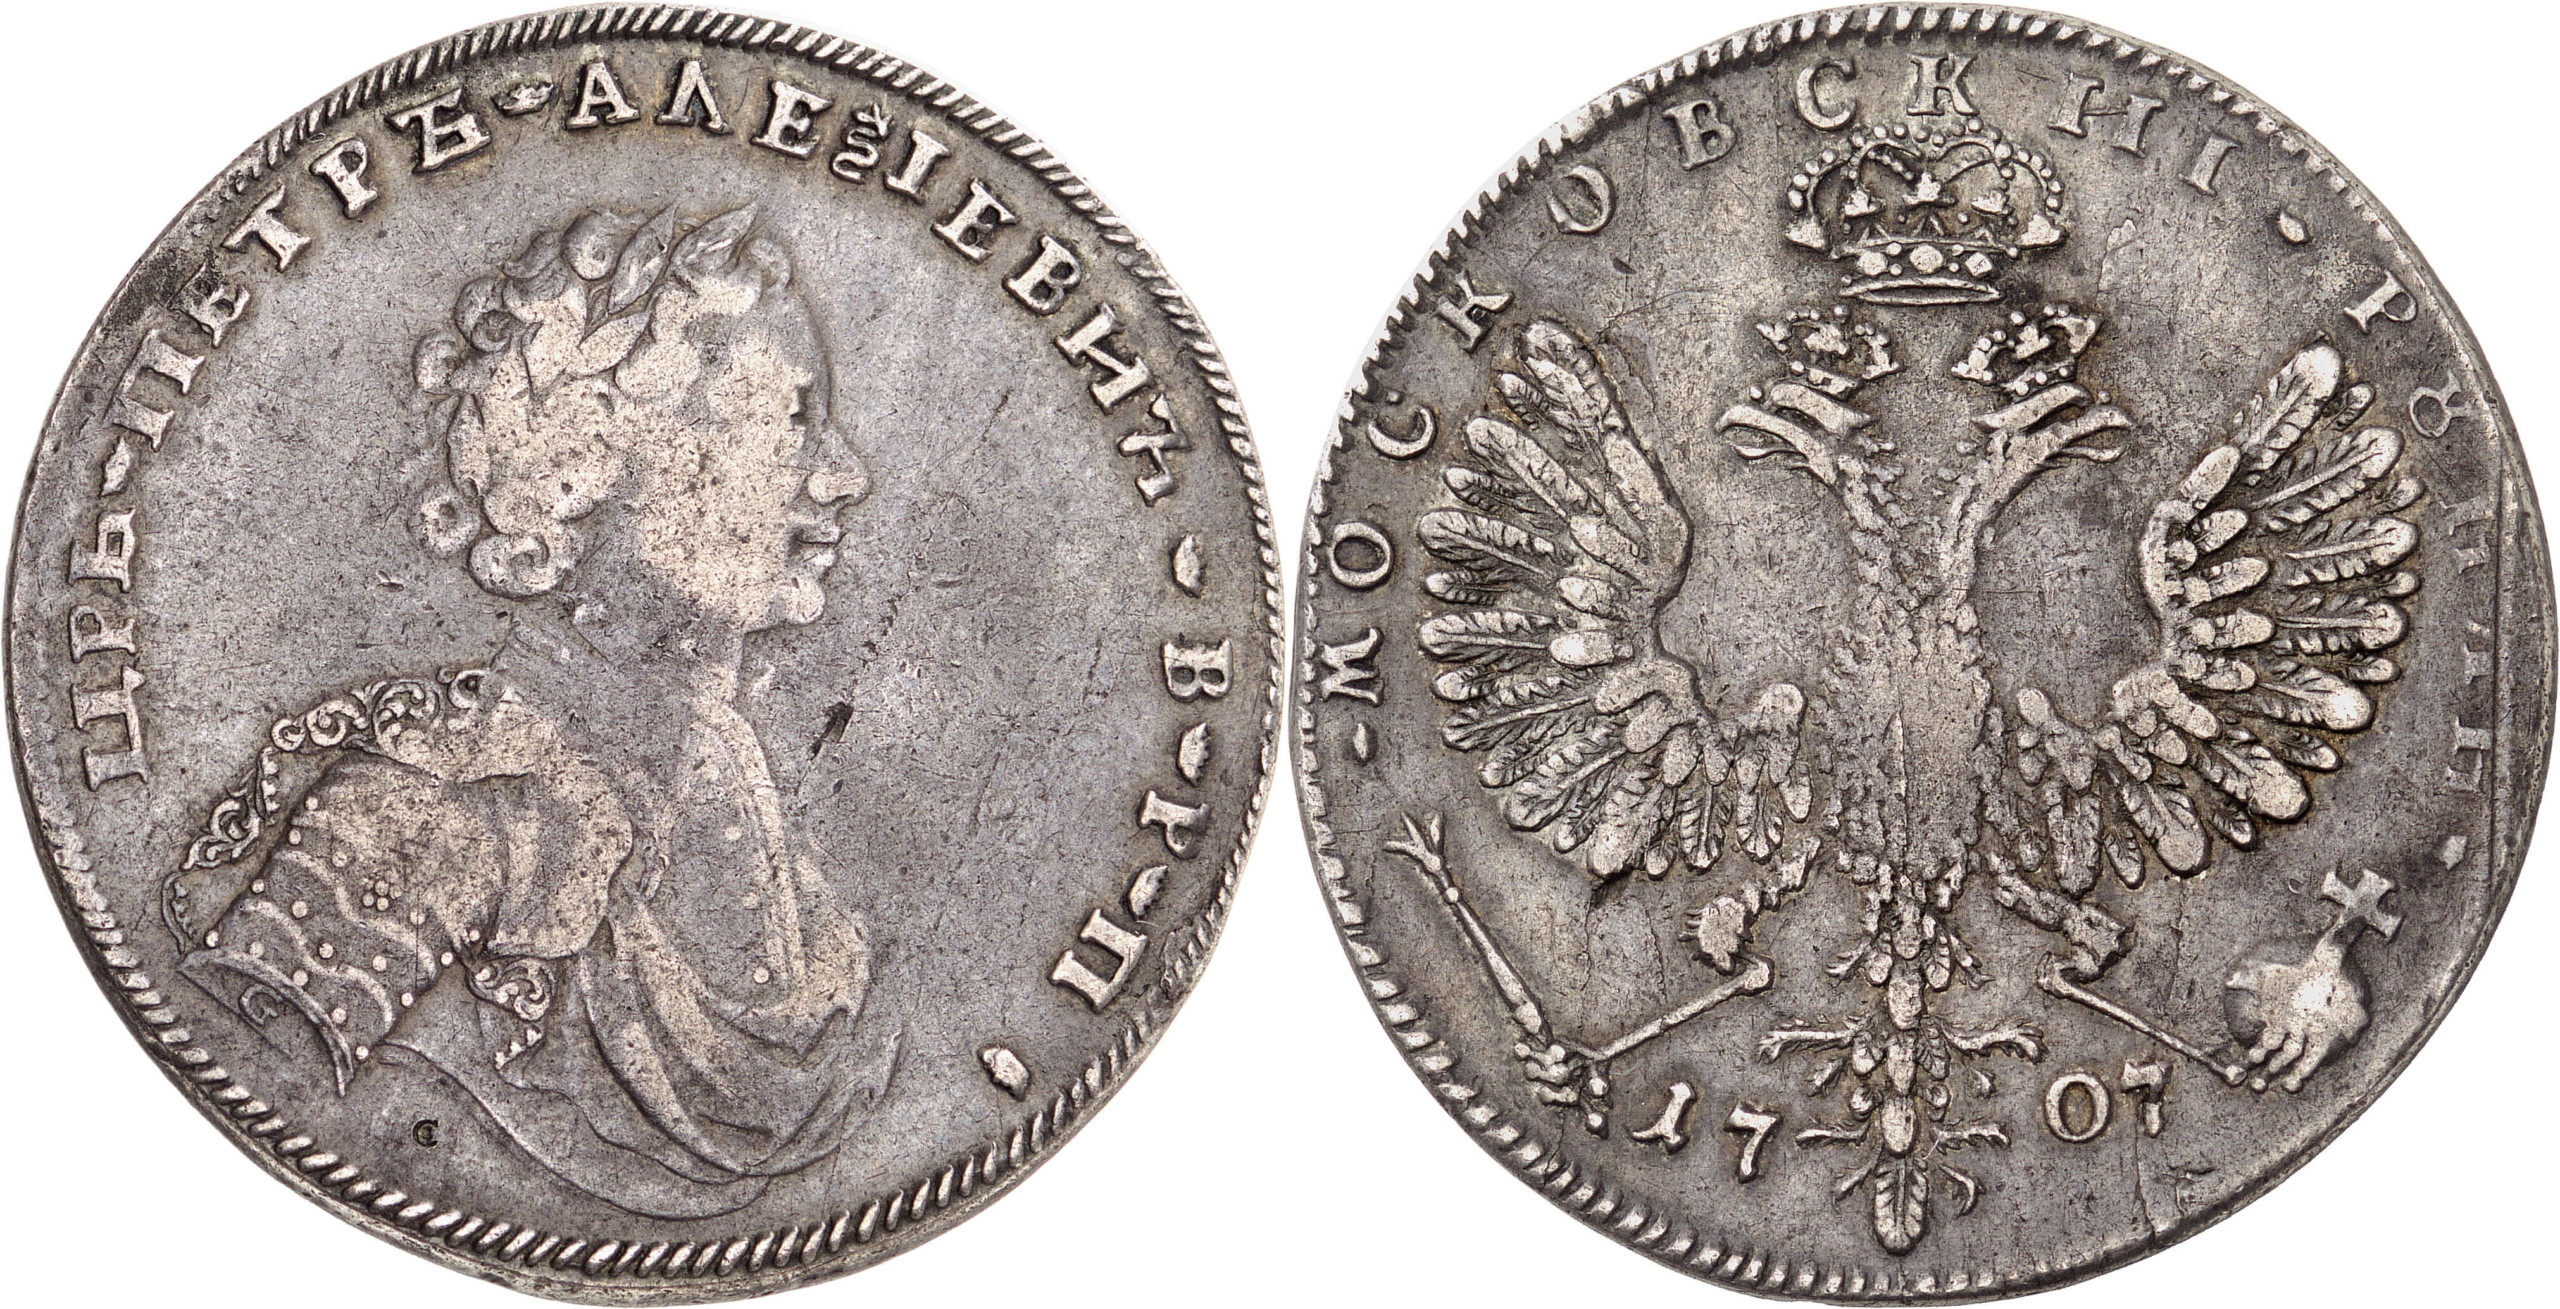 No. 4637. Russia. Peter I, 1682-1725. 1707 rouble, Moscow, Kadashevsky Mint. Very rare. Specimen of the Hutten-Czapski Collection (with collector punch). Very fine +. Estimate: 150,000 euros. Hammer price: 170,000 euros.